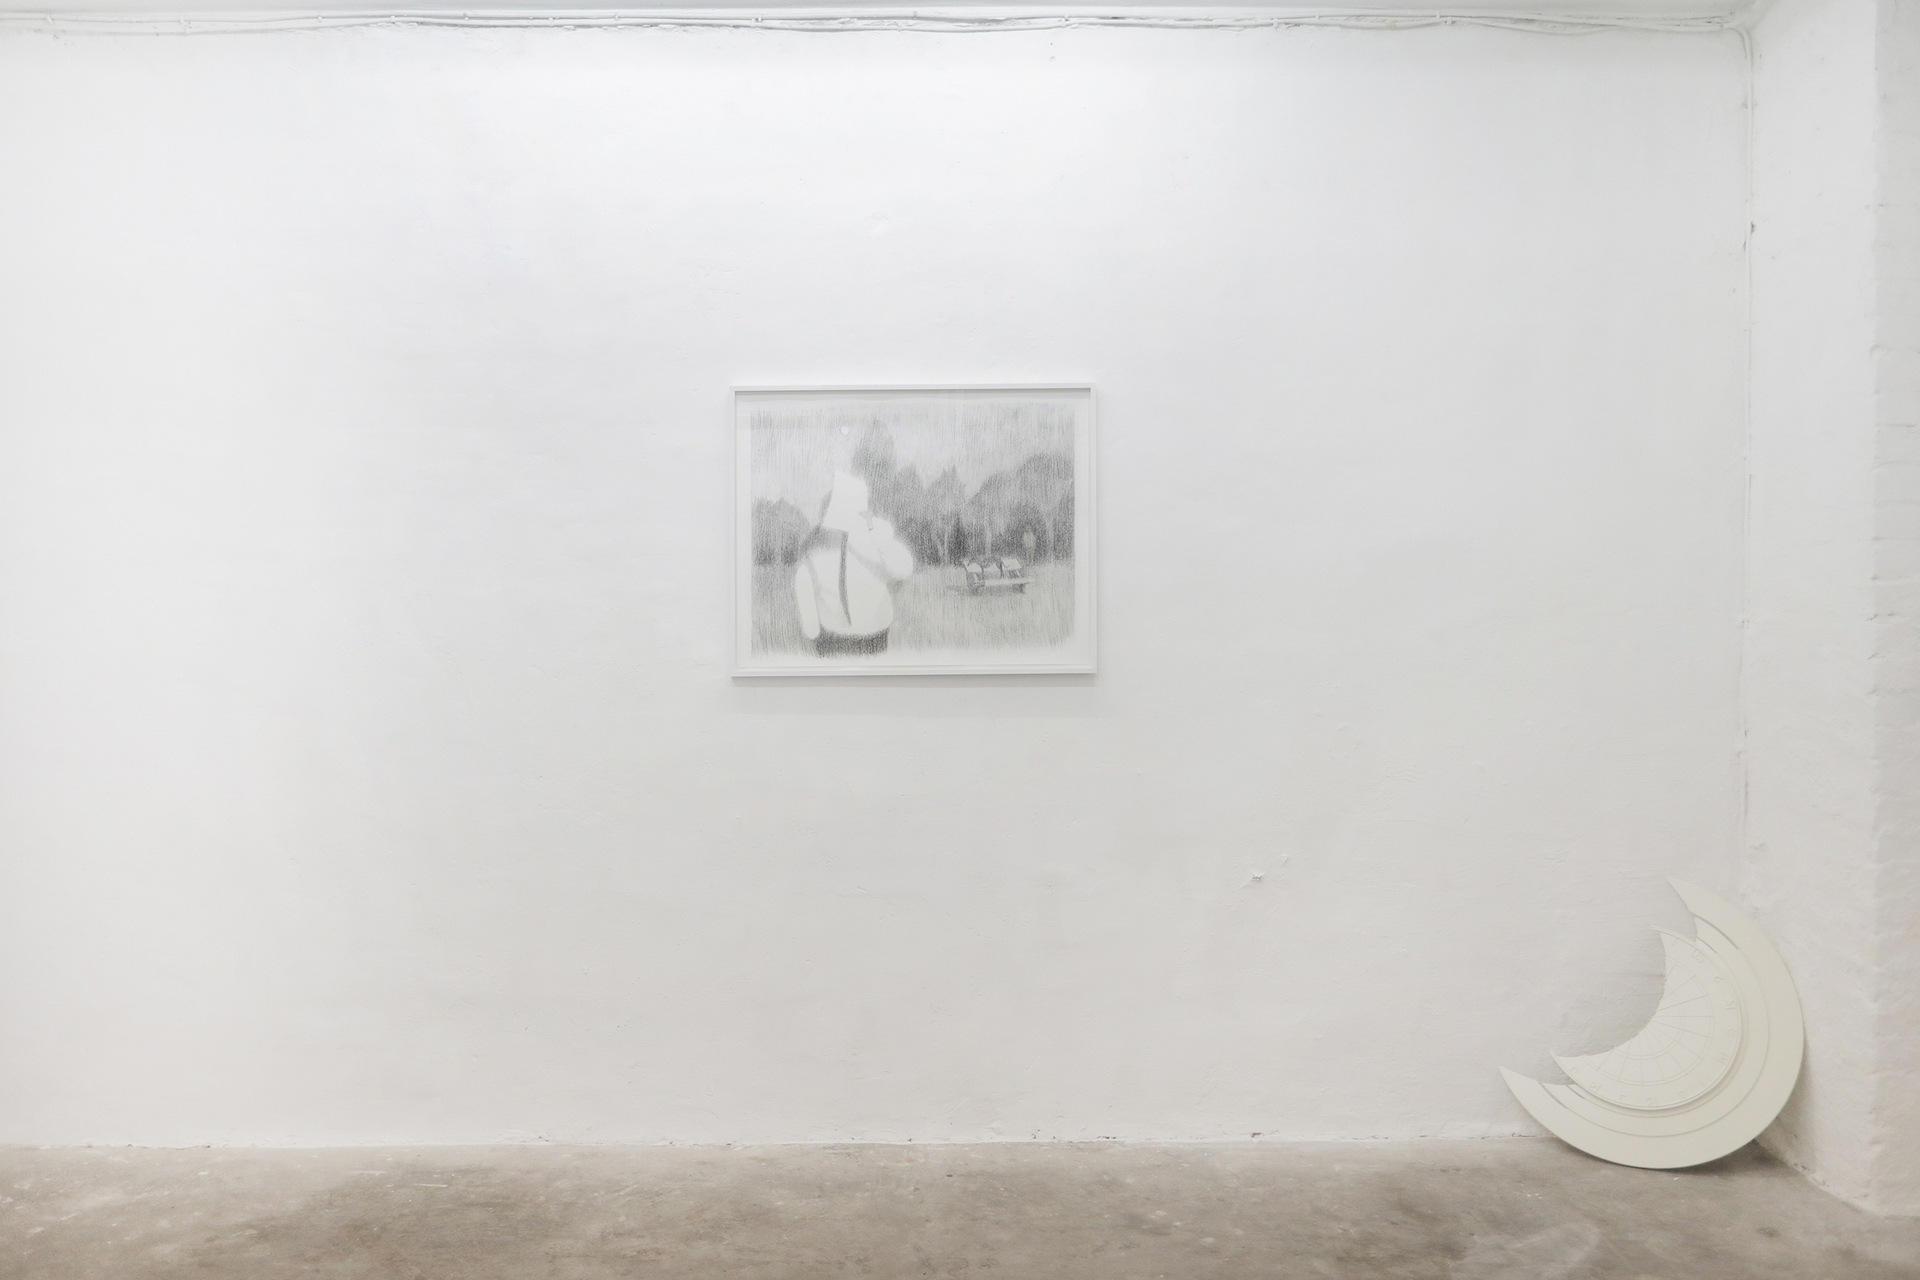 Noi Fuhrer, Sunburnt or Moonstruck?, 2020, charcoal on Paper, 88x66cm (left) Marie Pietsch, just next to it is also over, 2020/21, aluminium, steel, polyurethan, size variable (right)